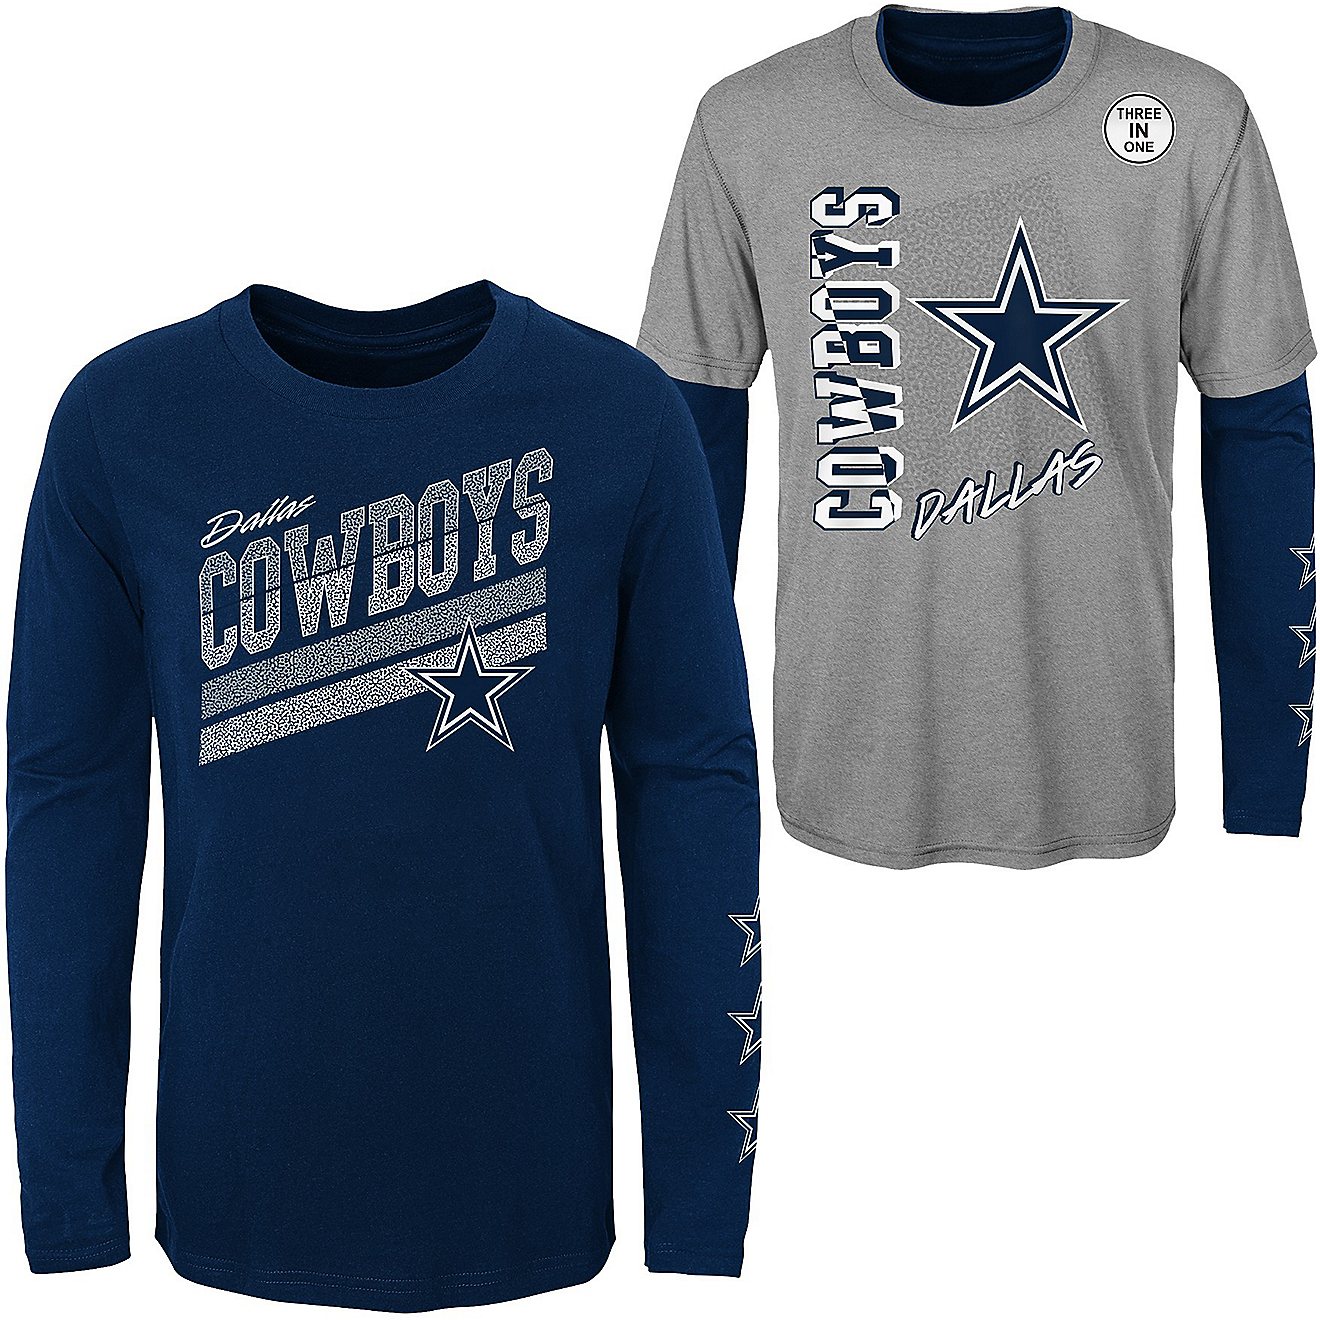 Outerstuff Toddler Boys' Dallas Cowboys 3-in-1 T-shirt Set                                                                       - view number 1